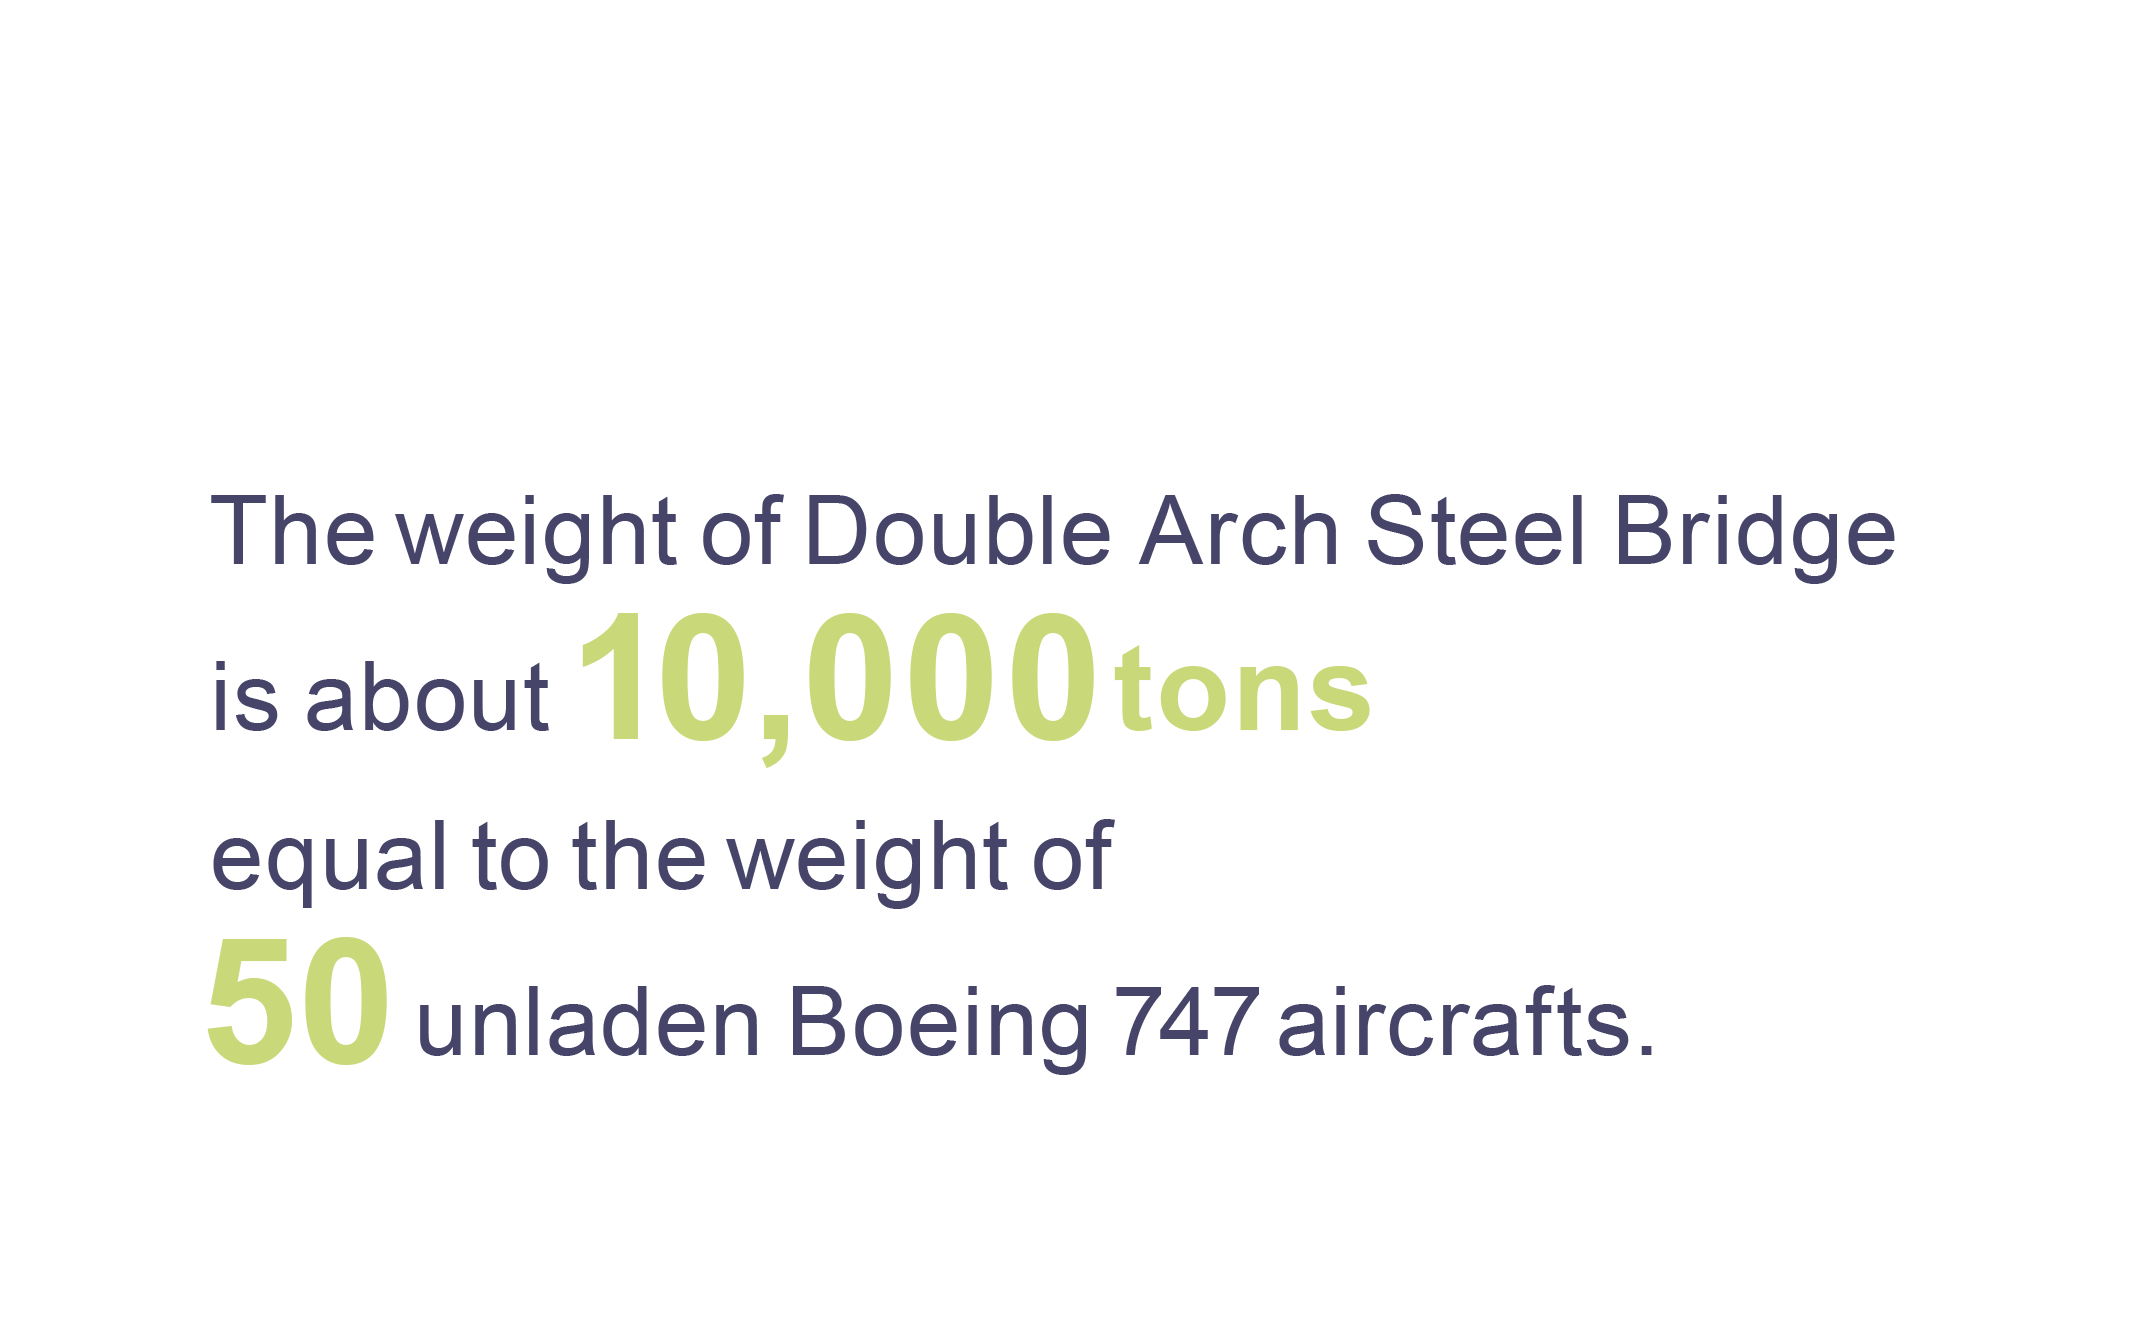 The weight of Double-Arch Steel Bridge is about 10,000 tons equal to the weight of 50 unladen Boeing 747 aircrafts